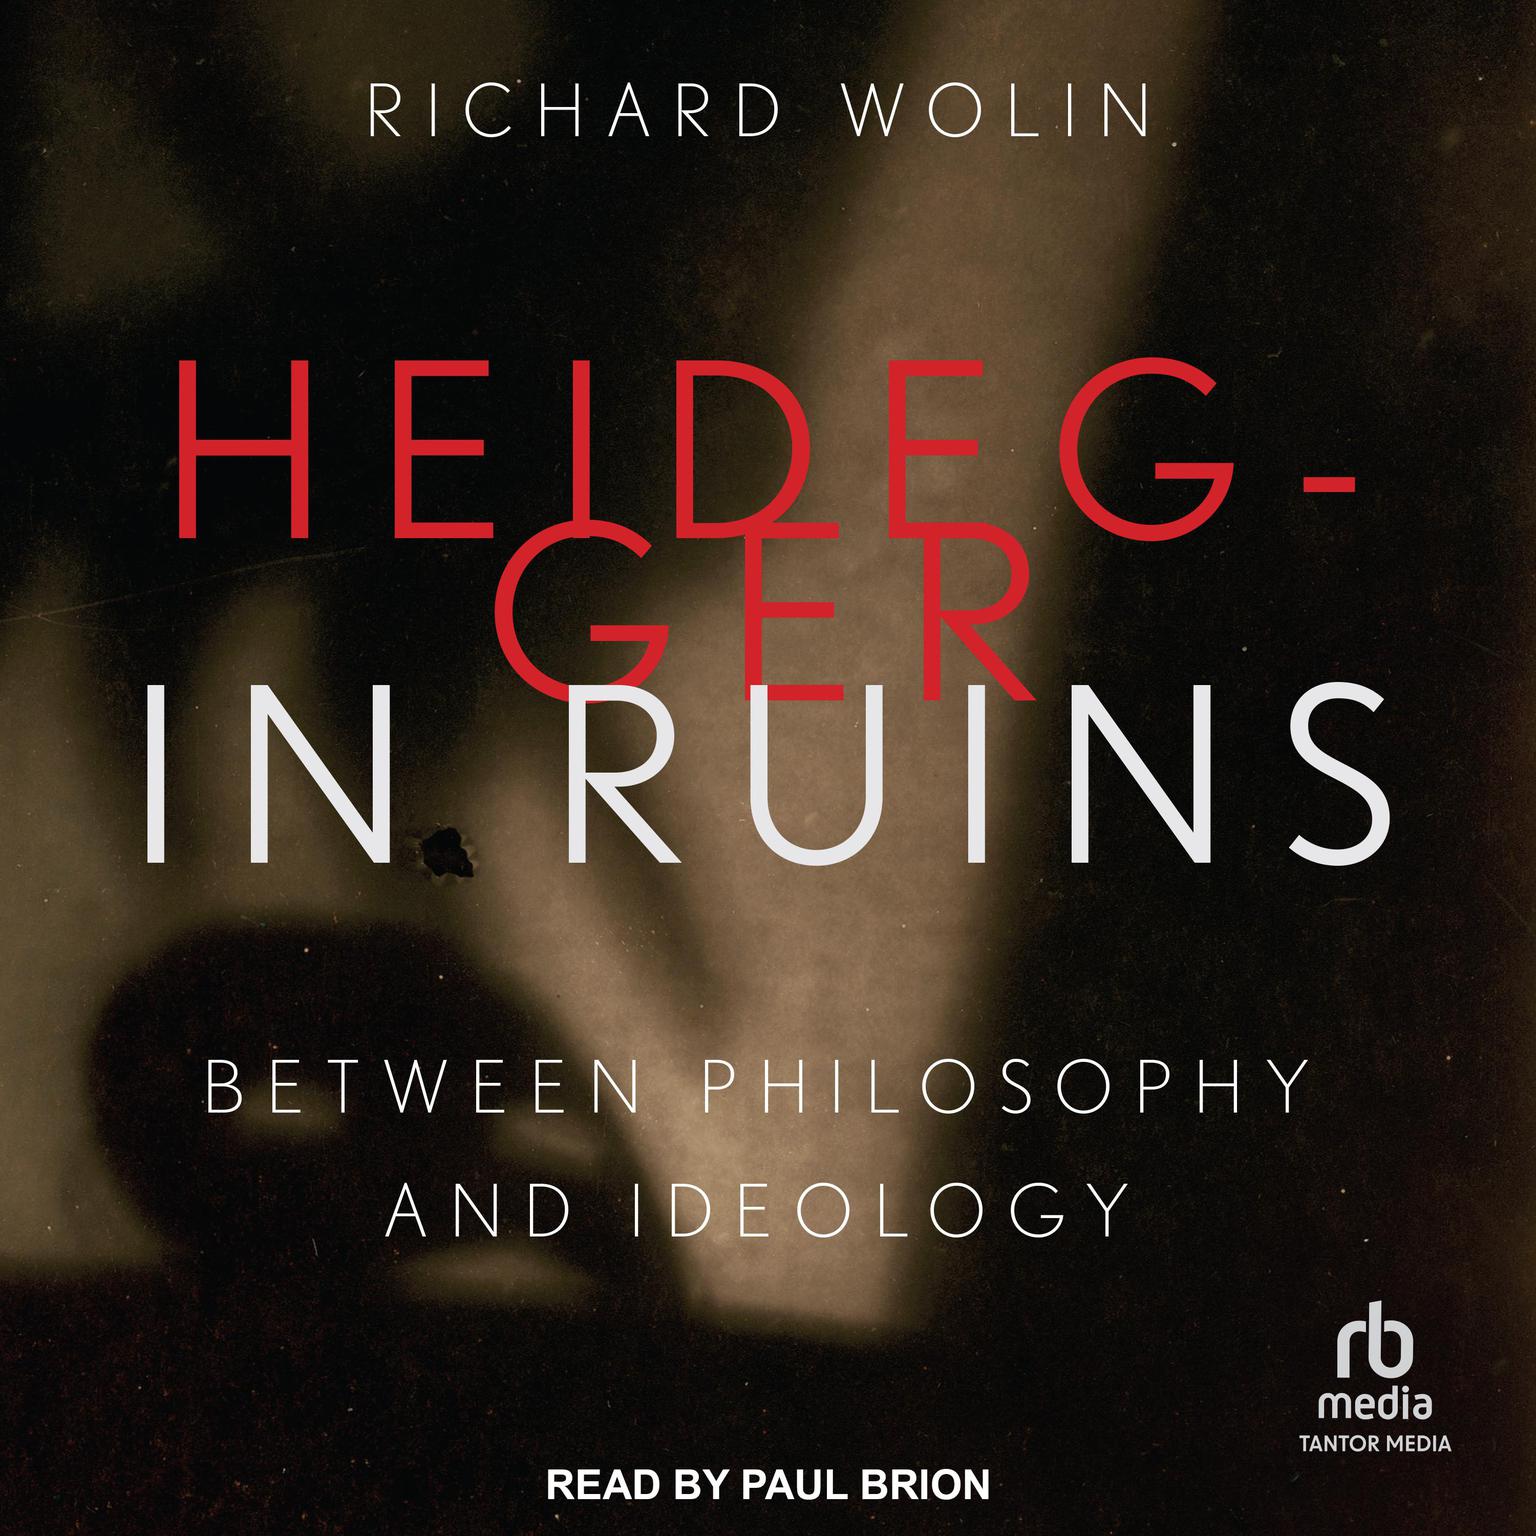 Heidegger in Ruins: Between Philosophy and Ideology Audiobook, by Richard Wolin